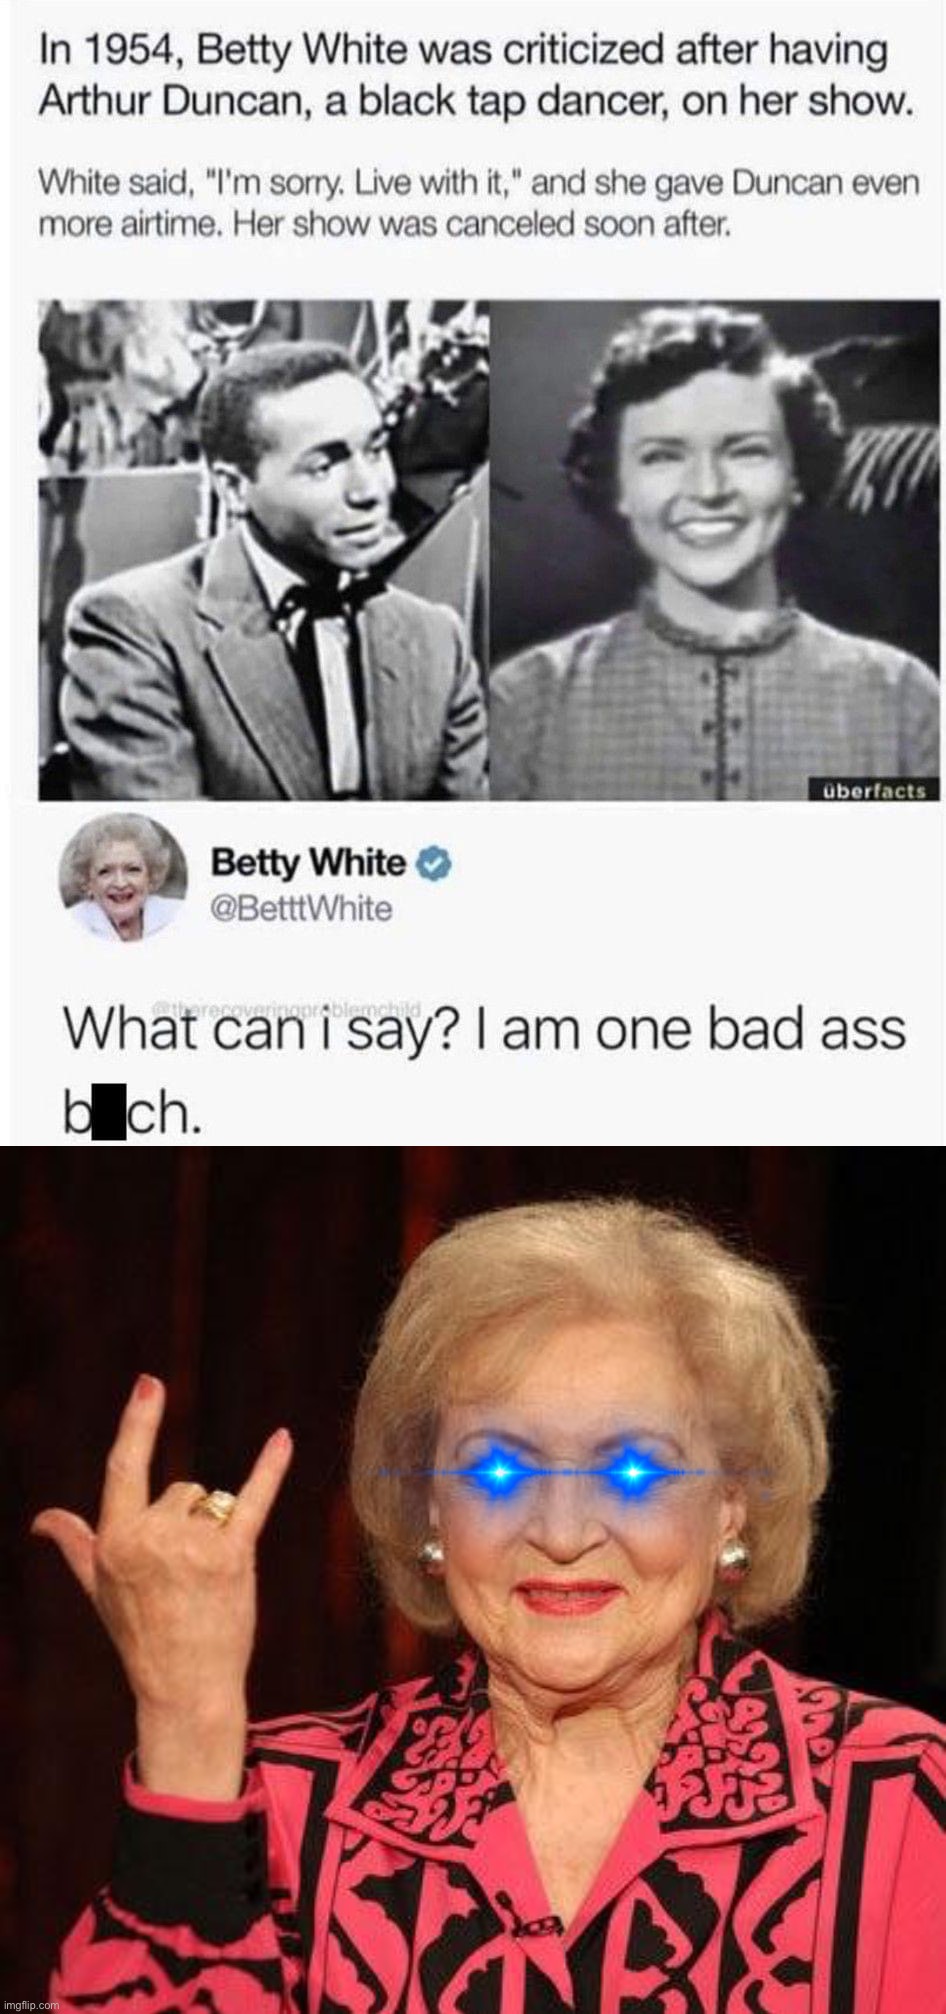 Badass anti-racist b*tch | image tagged in betty white is a bad ass bitch,betty white,racism,1950s,1950's,based | made w/ Imgflip meme maker